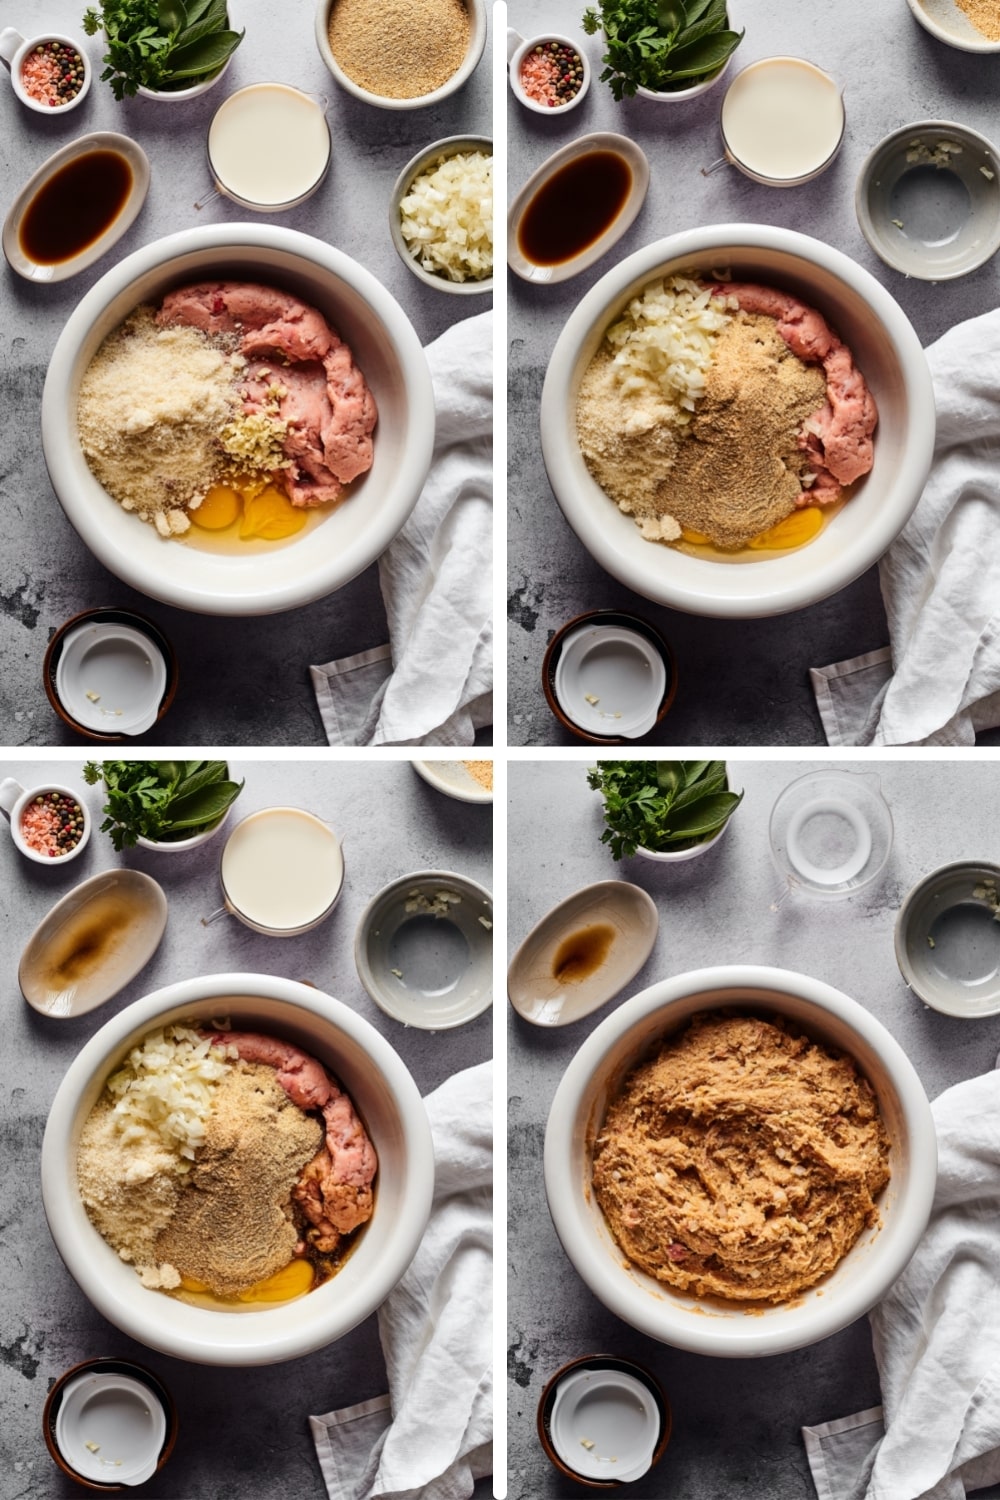 A four split picture with all of the chicken meatloaf ingredients in bowls showing the process of mixing the ingredients together.